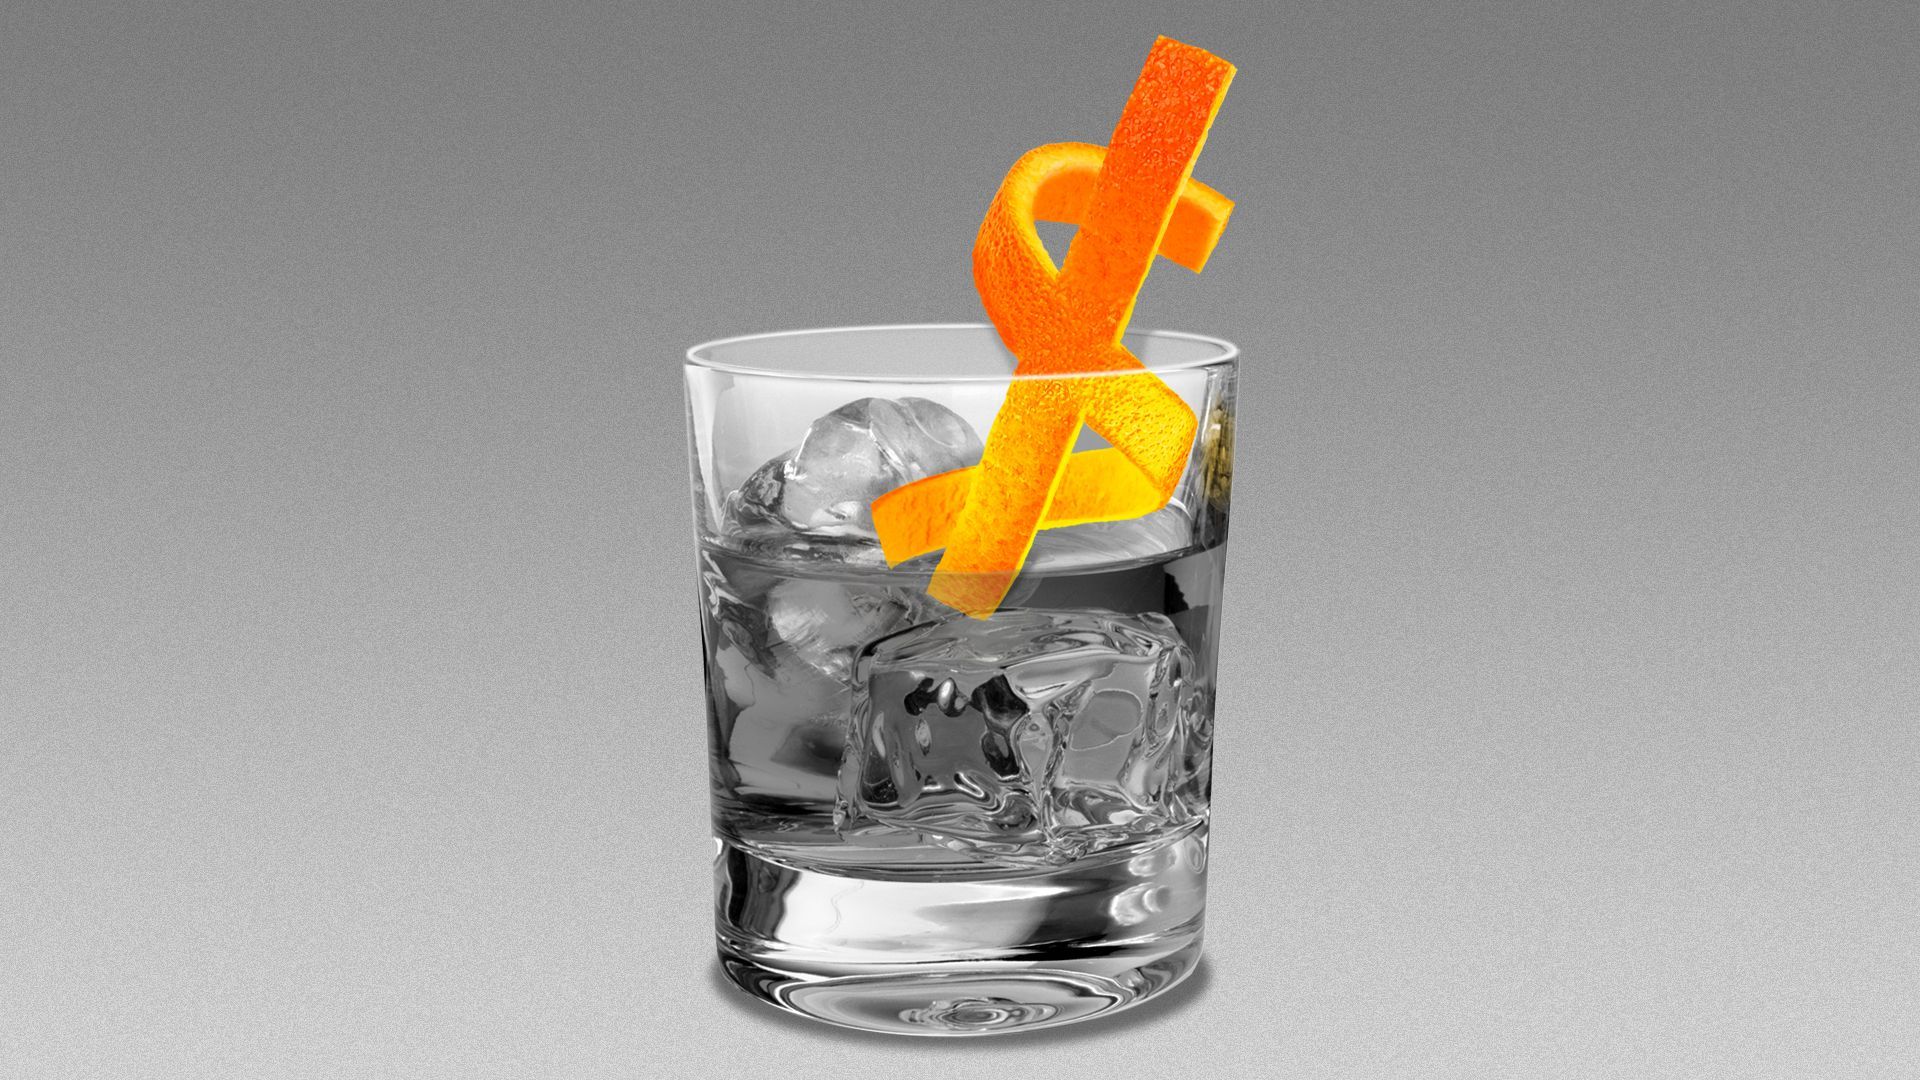 Illustration of a cocktail glass with a dollar-sign-shaped orange twist